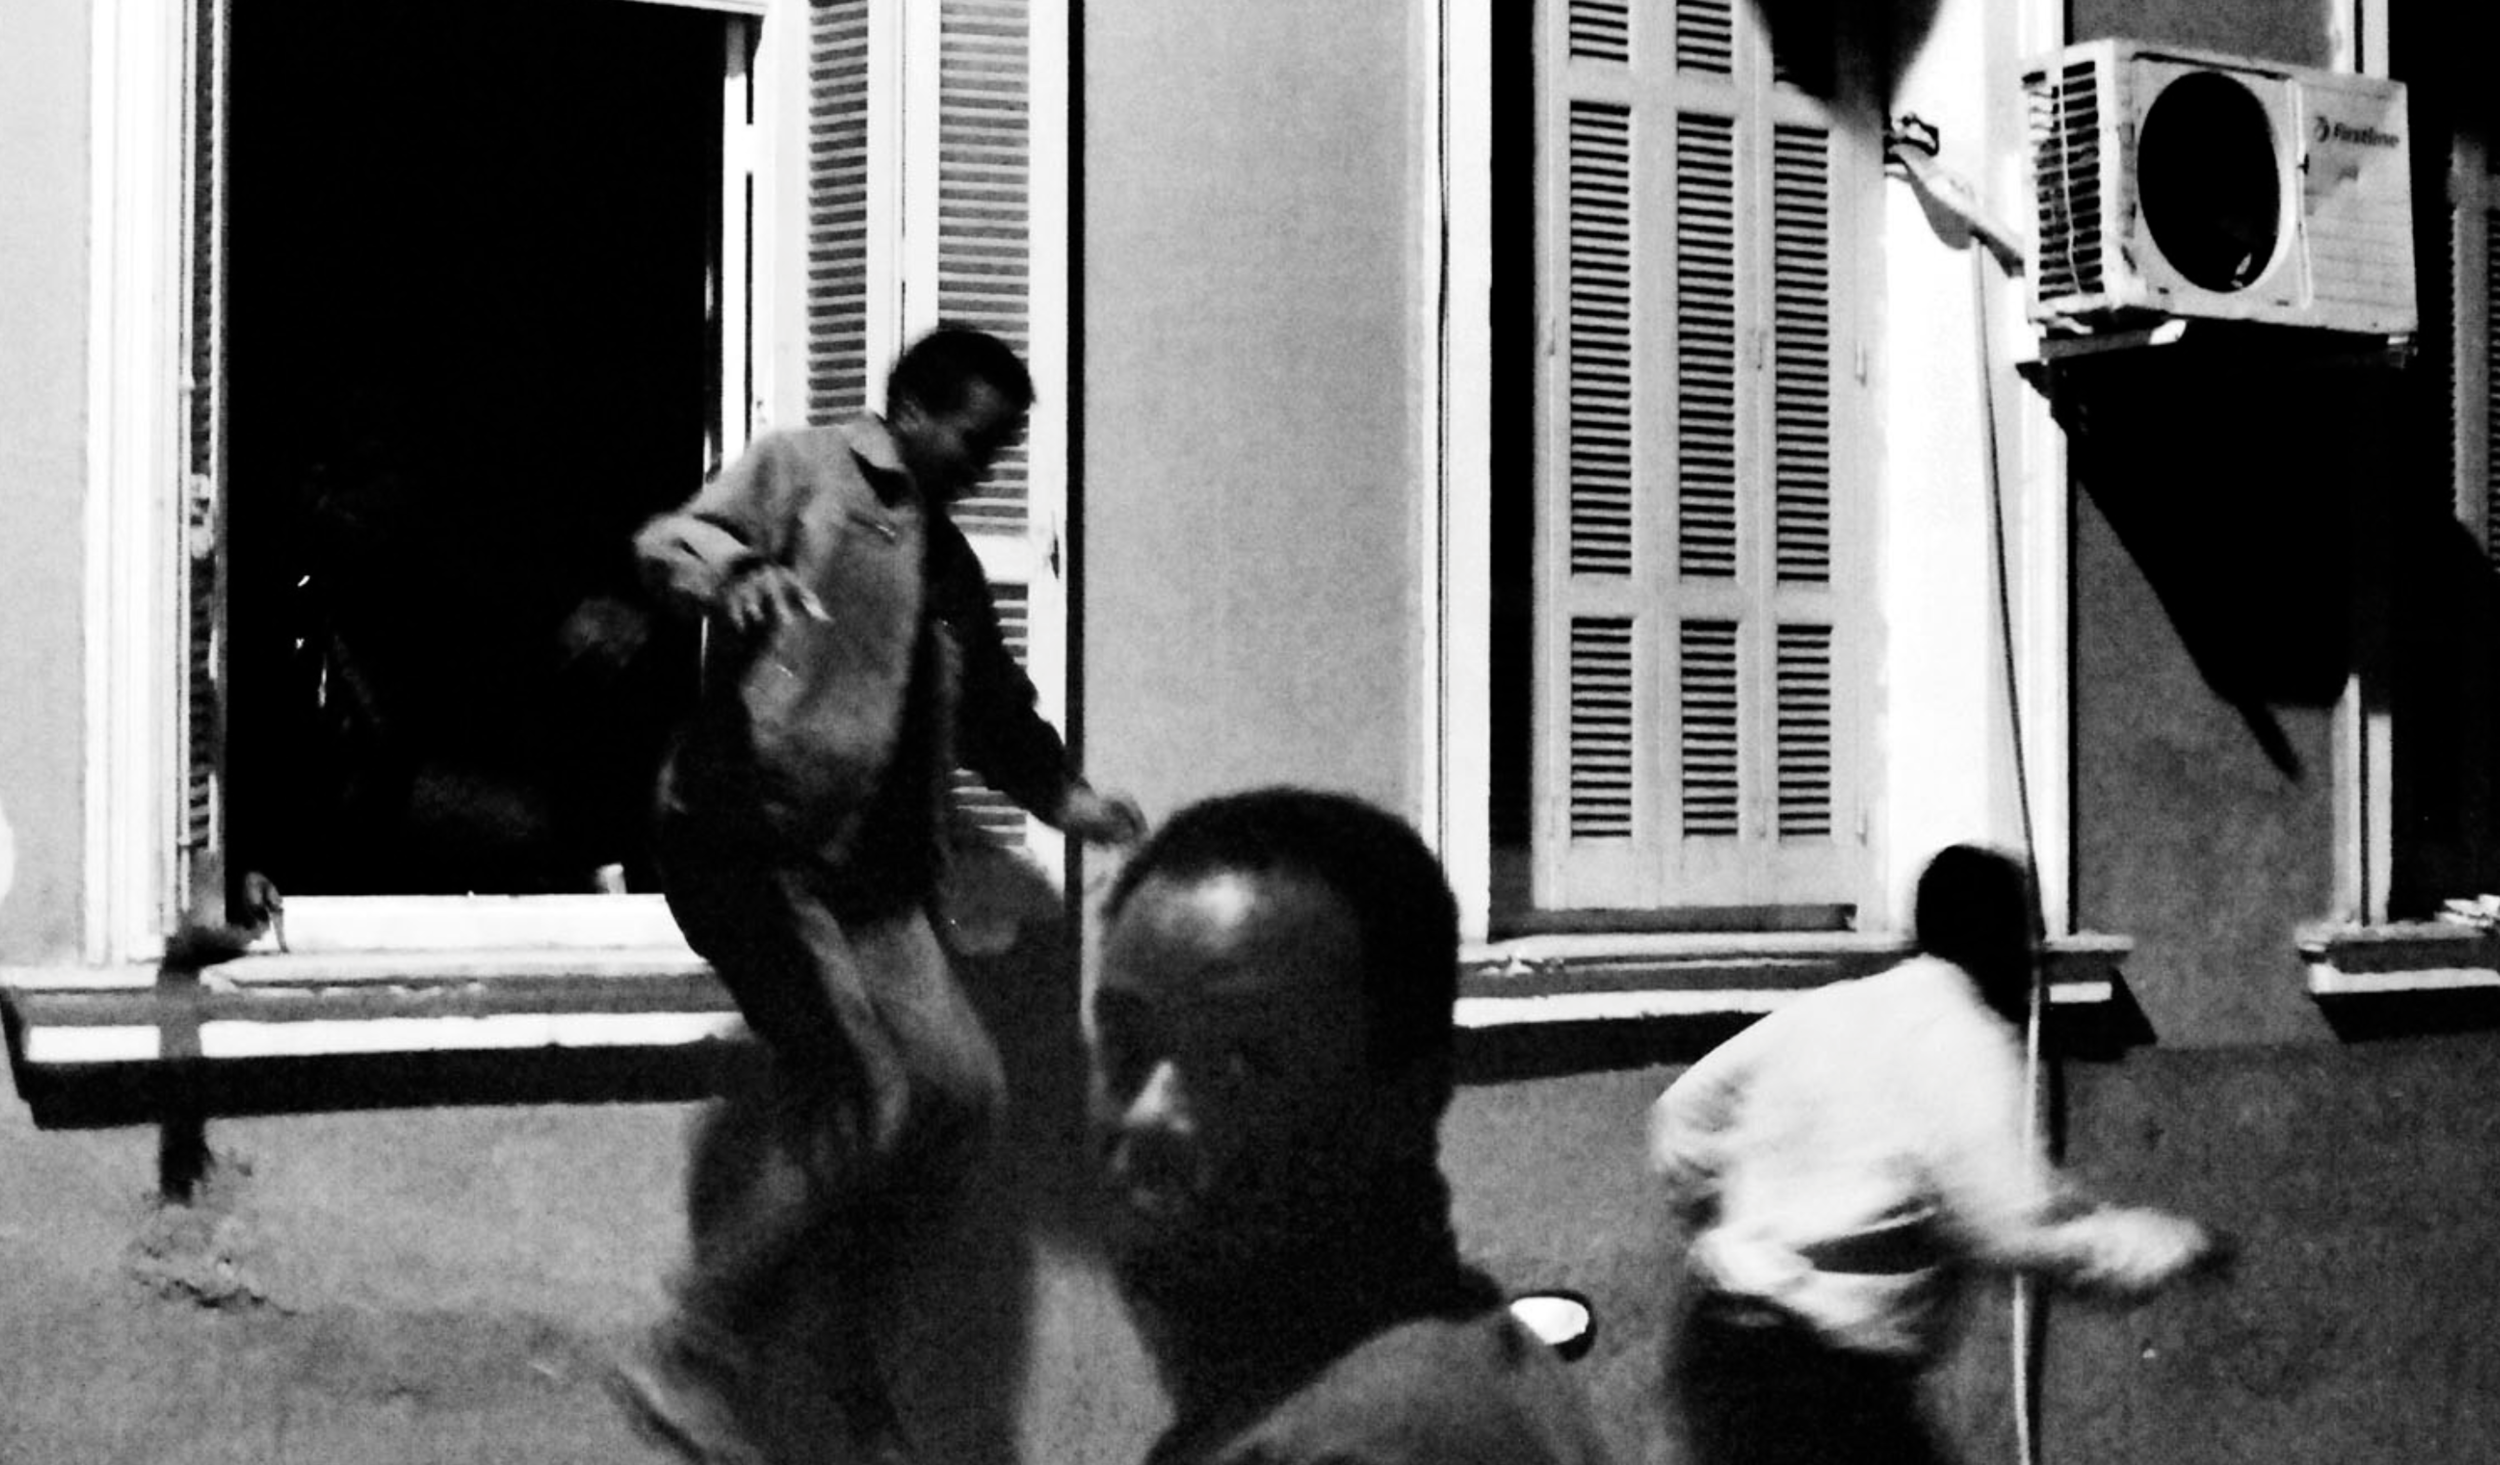  Somali migrants break out and flee from the Somali Centre after a police raid. Following the raid, hose who were not arrested were locked inside. During two such successive night raids in March 2012, police beat migrants and arrested about 50 to 60 